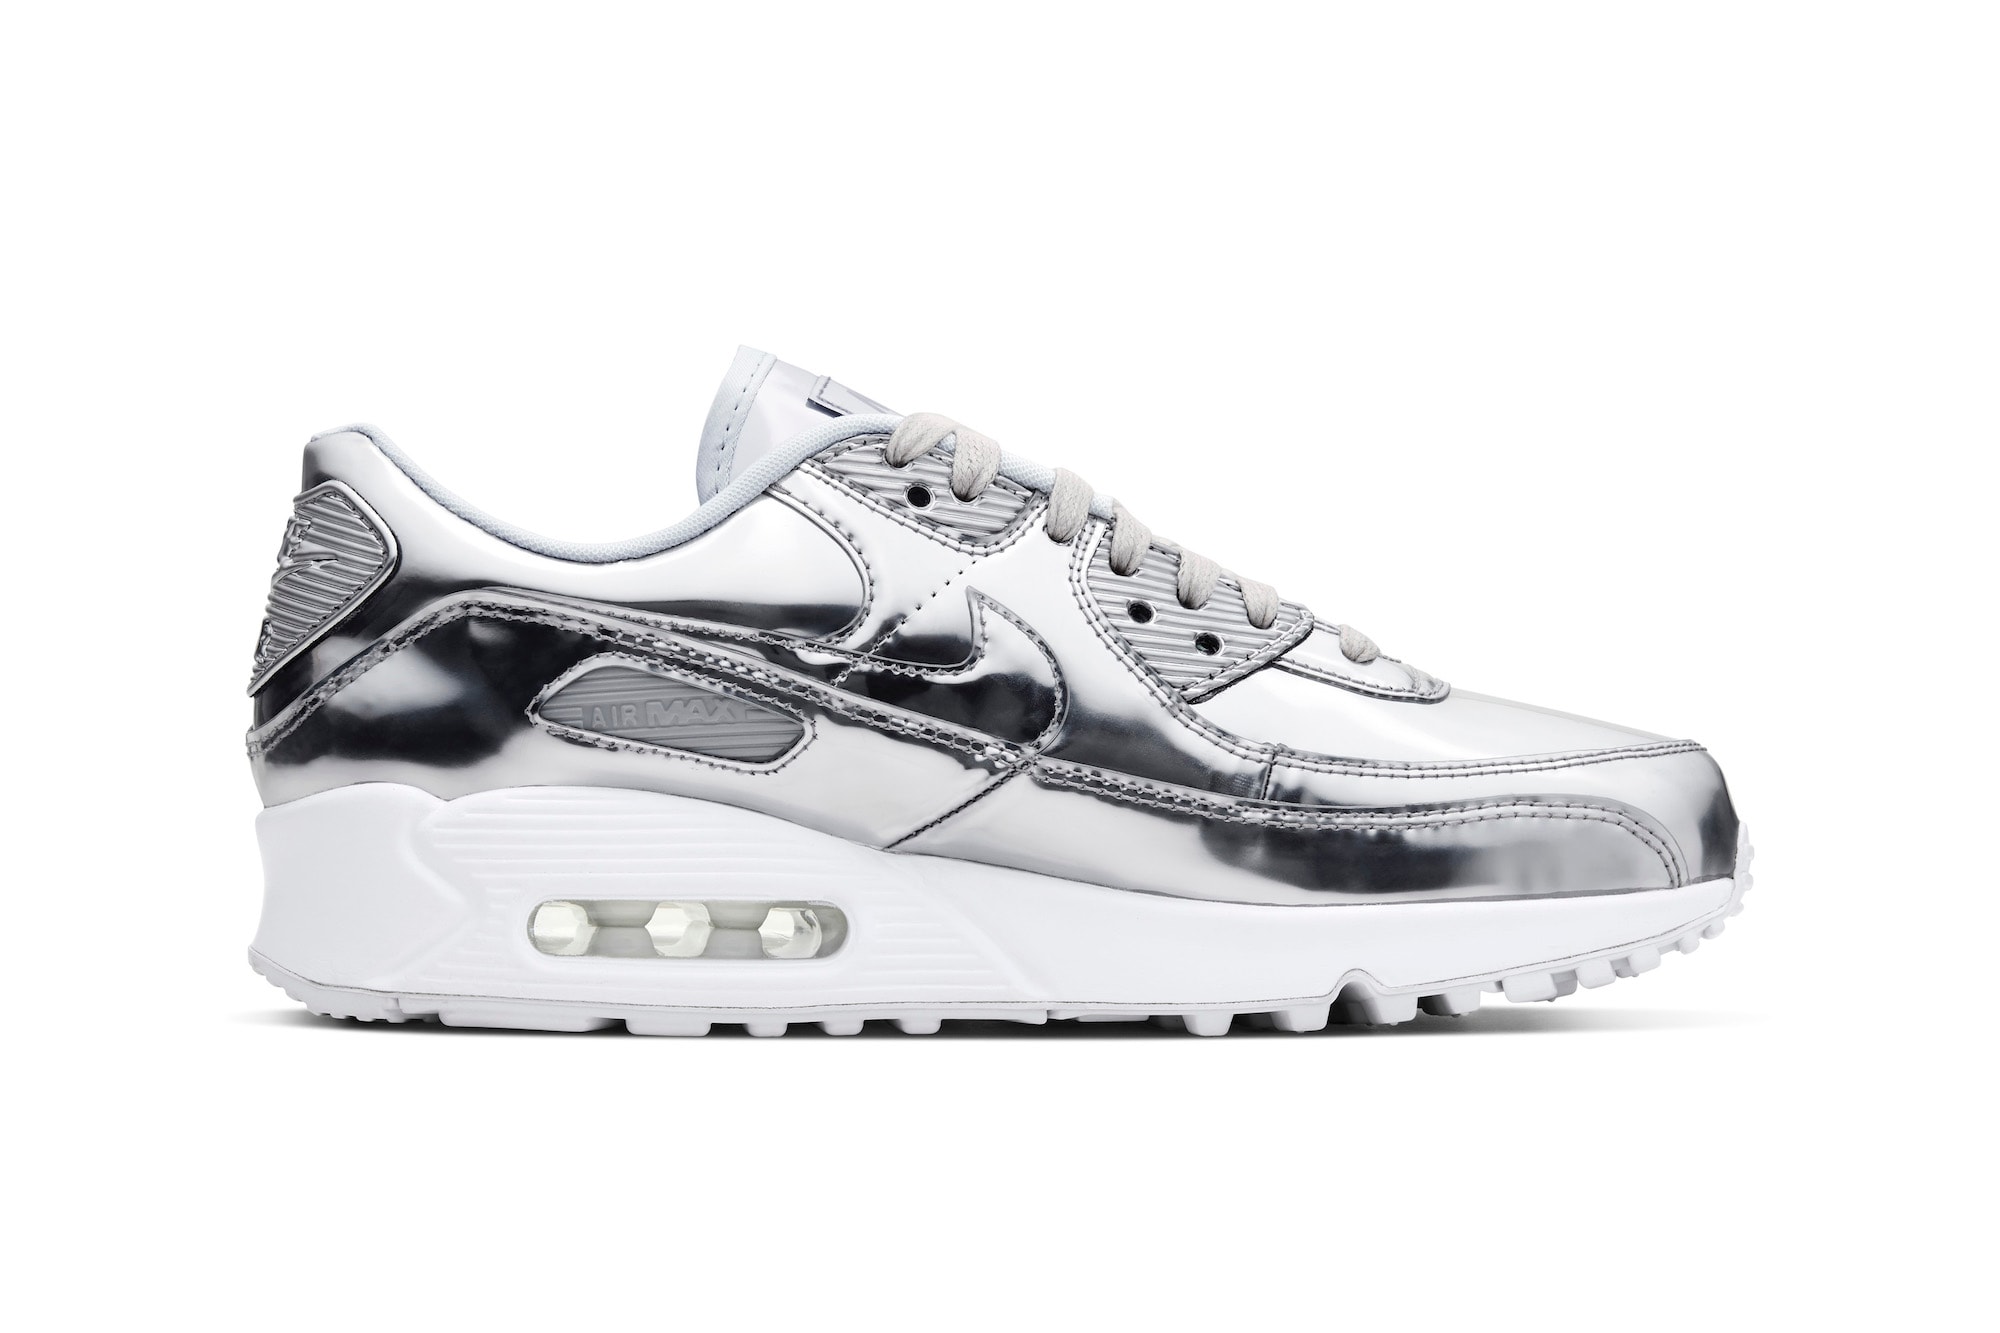 Nike Air Max 90 "Metallic Pack" Silver & Gold Sneaker Release Shiny 